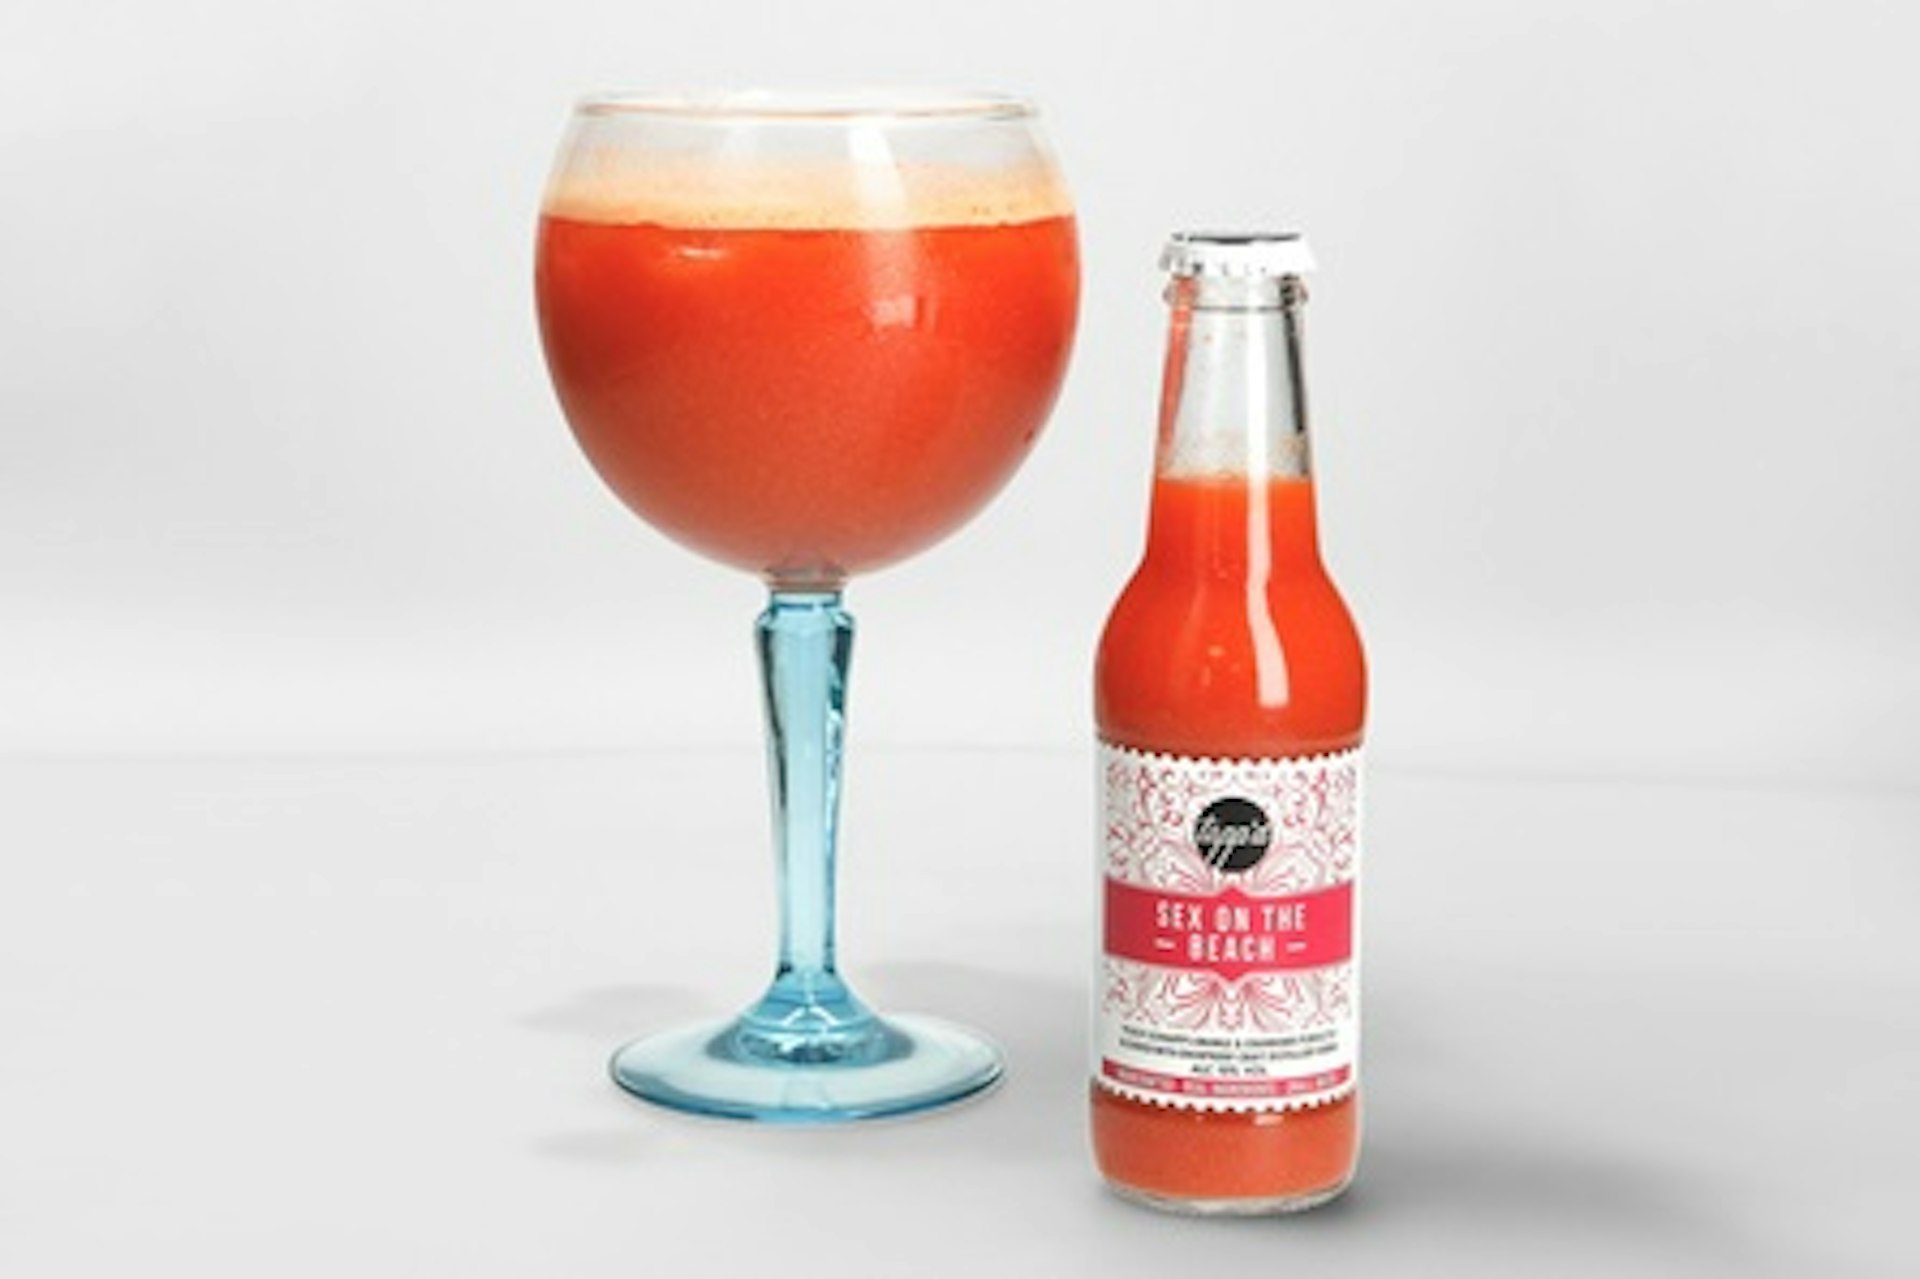 Delicious Chinese Dinner and Handcrafted Cocktails to Enjoy In - Feast Box for up to Six and 12 Mixed Cocktails from Tapp'd 4